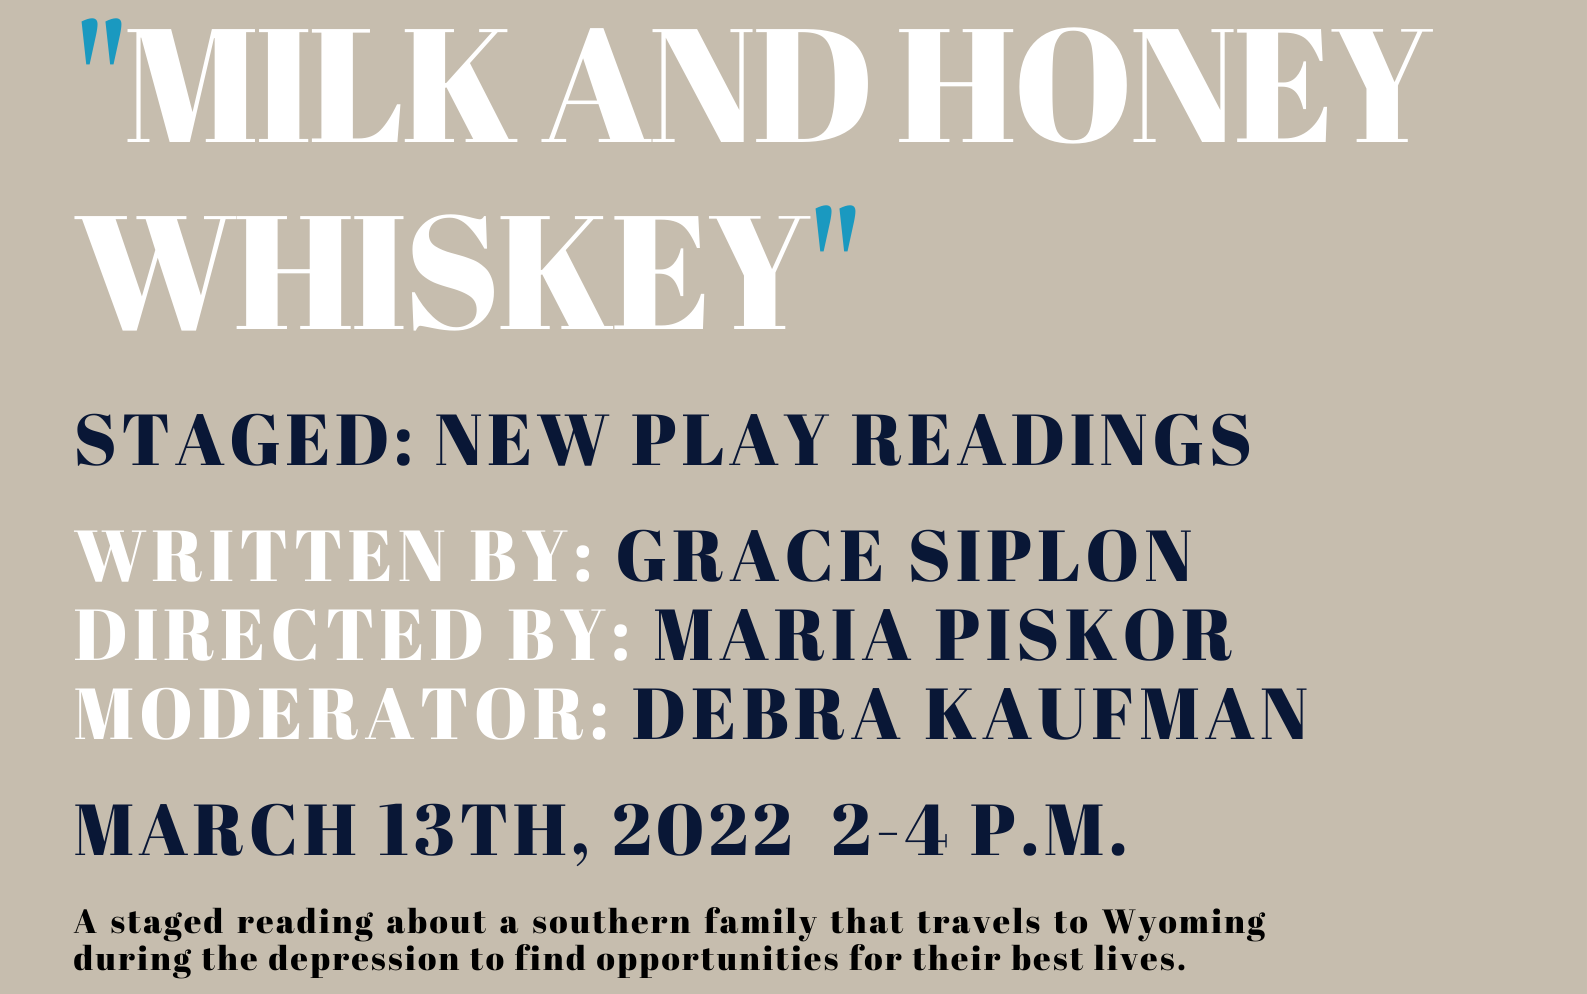 Staged: New Play Readings presents Milk and Honey Whiskey by Grace Siplon